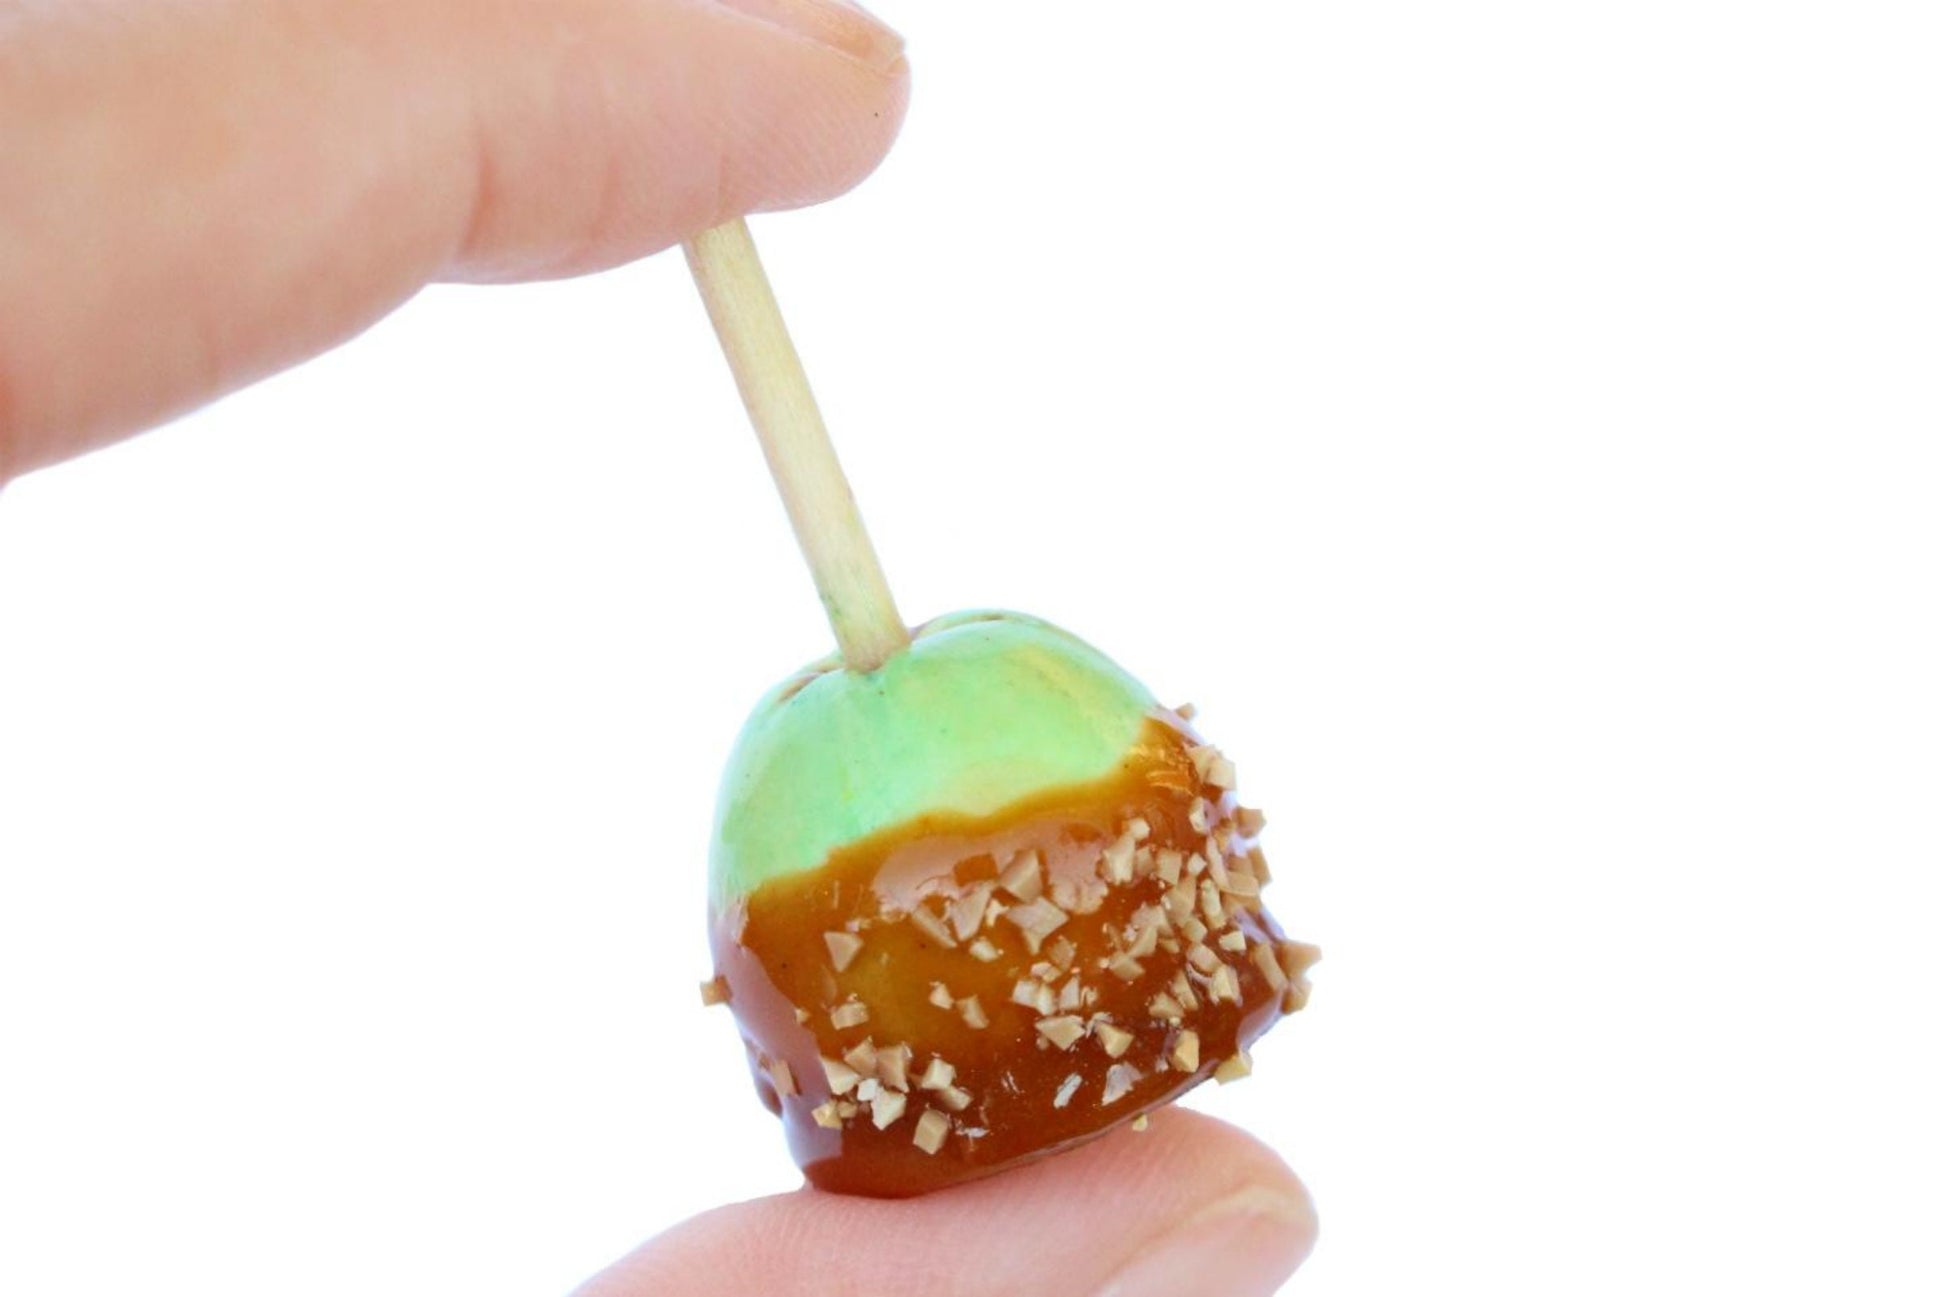 Single Candy Apple Scented Magnet | The Magnet Maiden